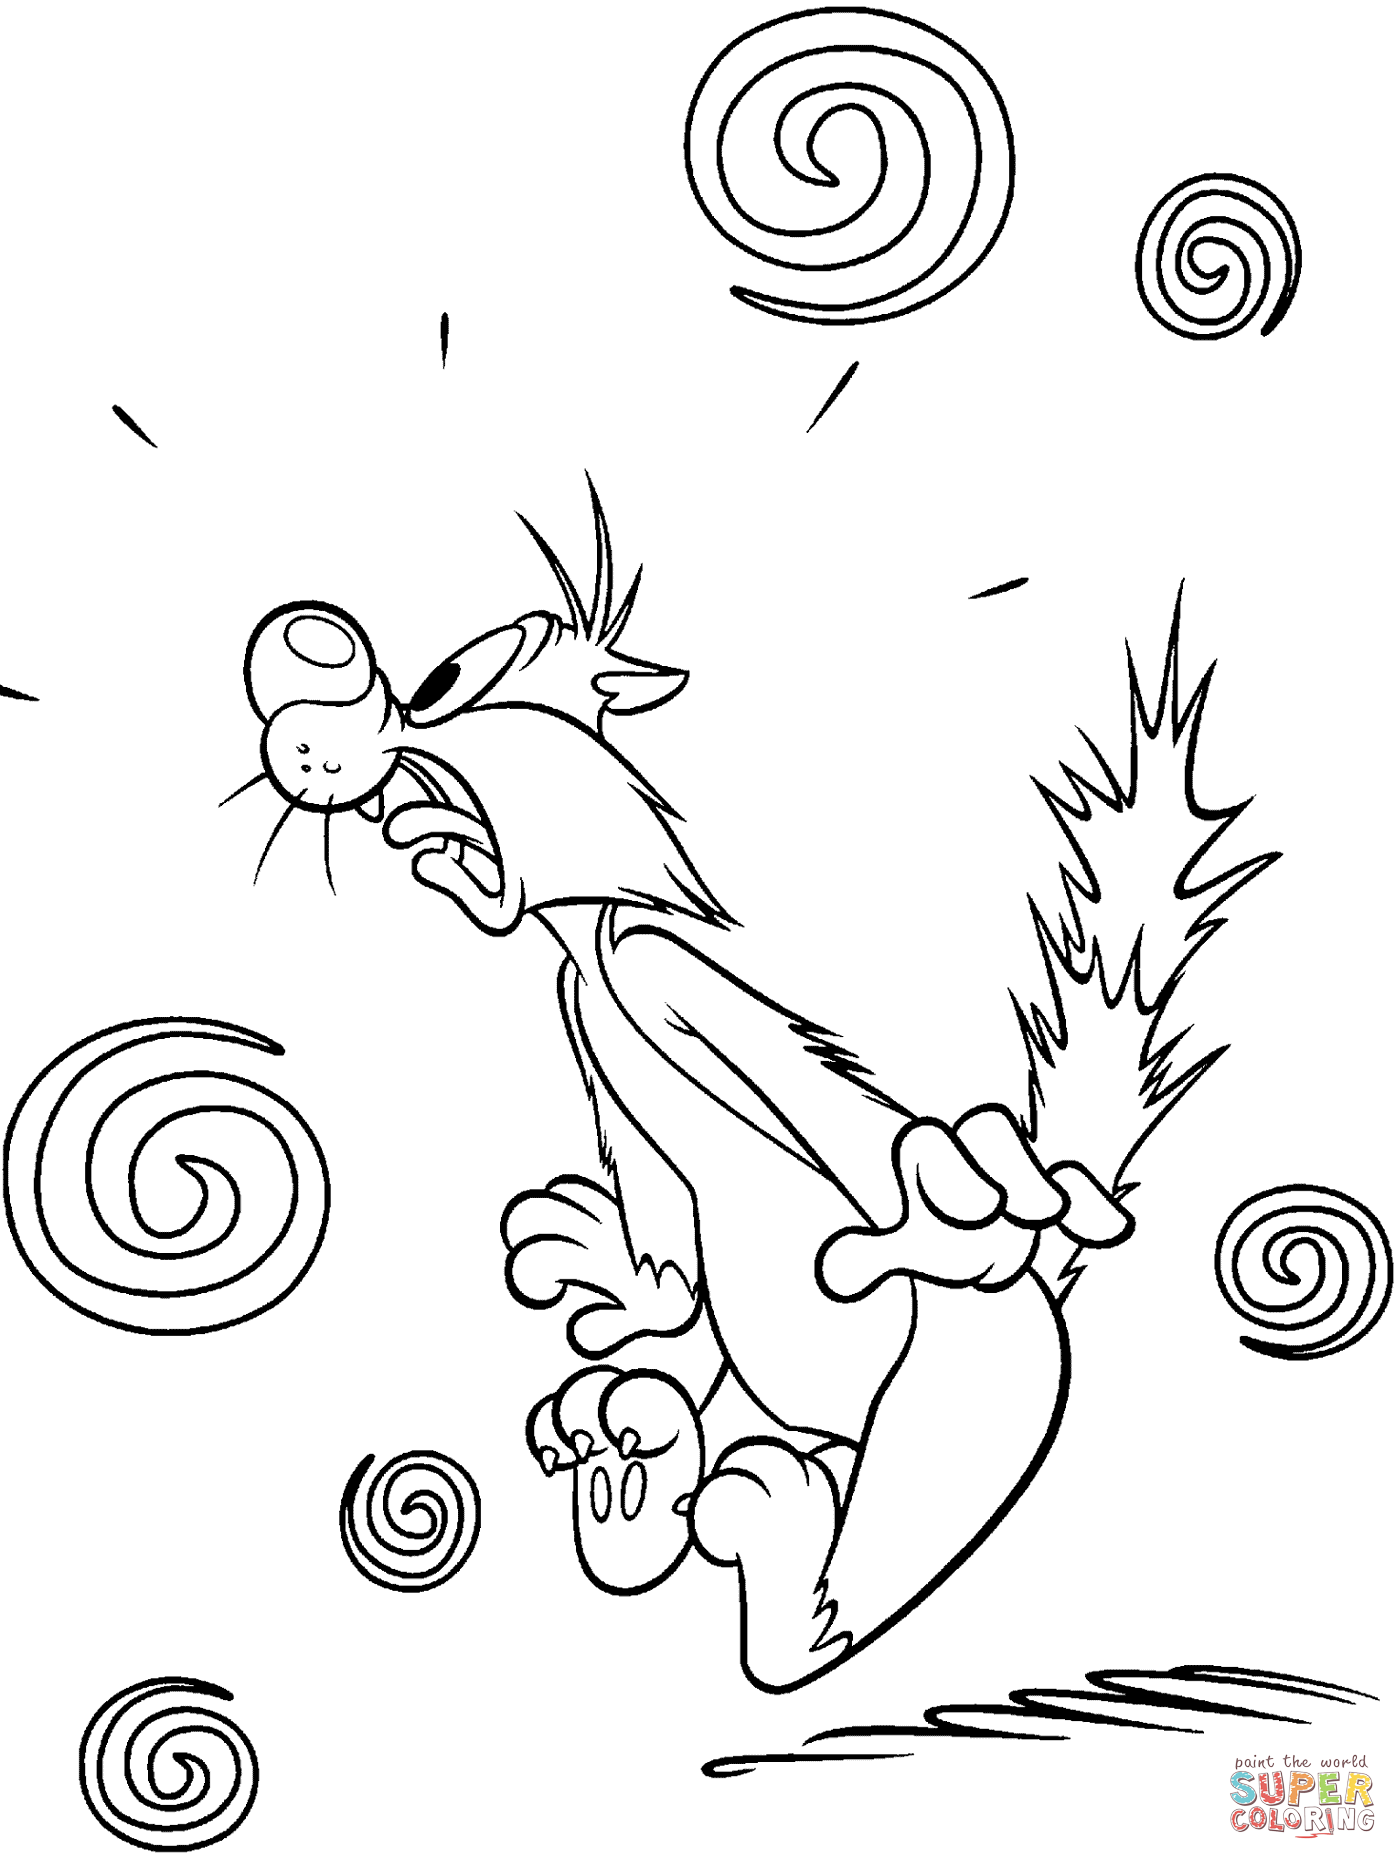 Looney Tunes Elmer Fudd coloring page | Free Printable Coloring Pages